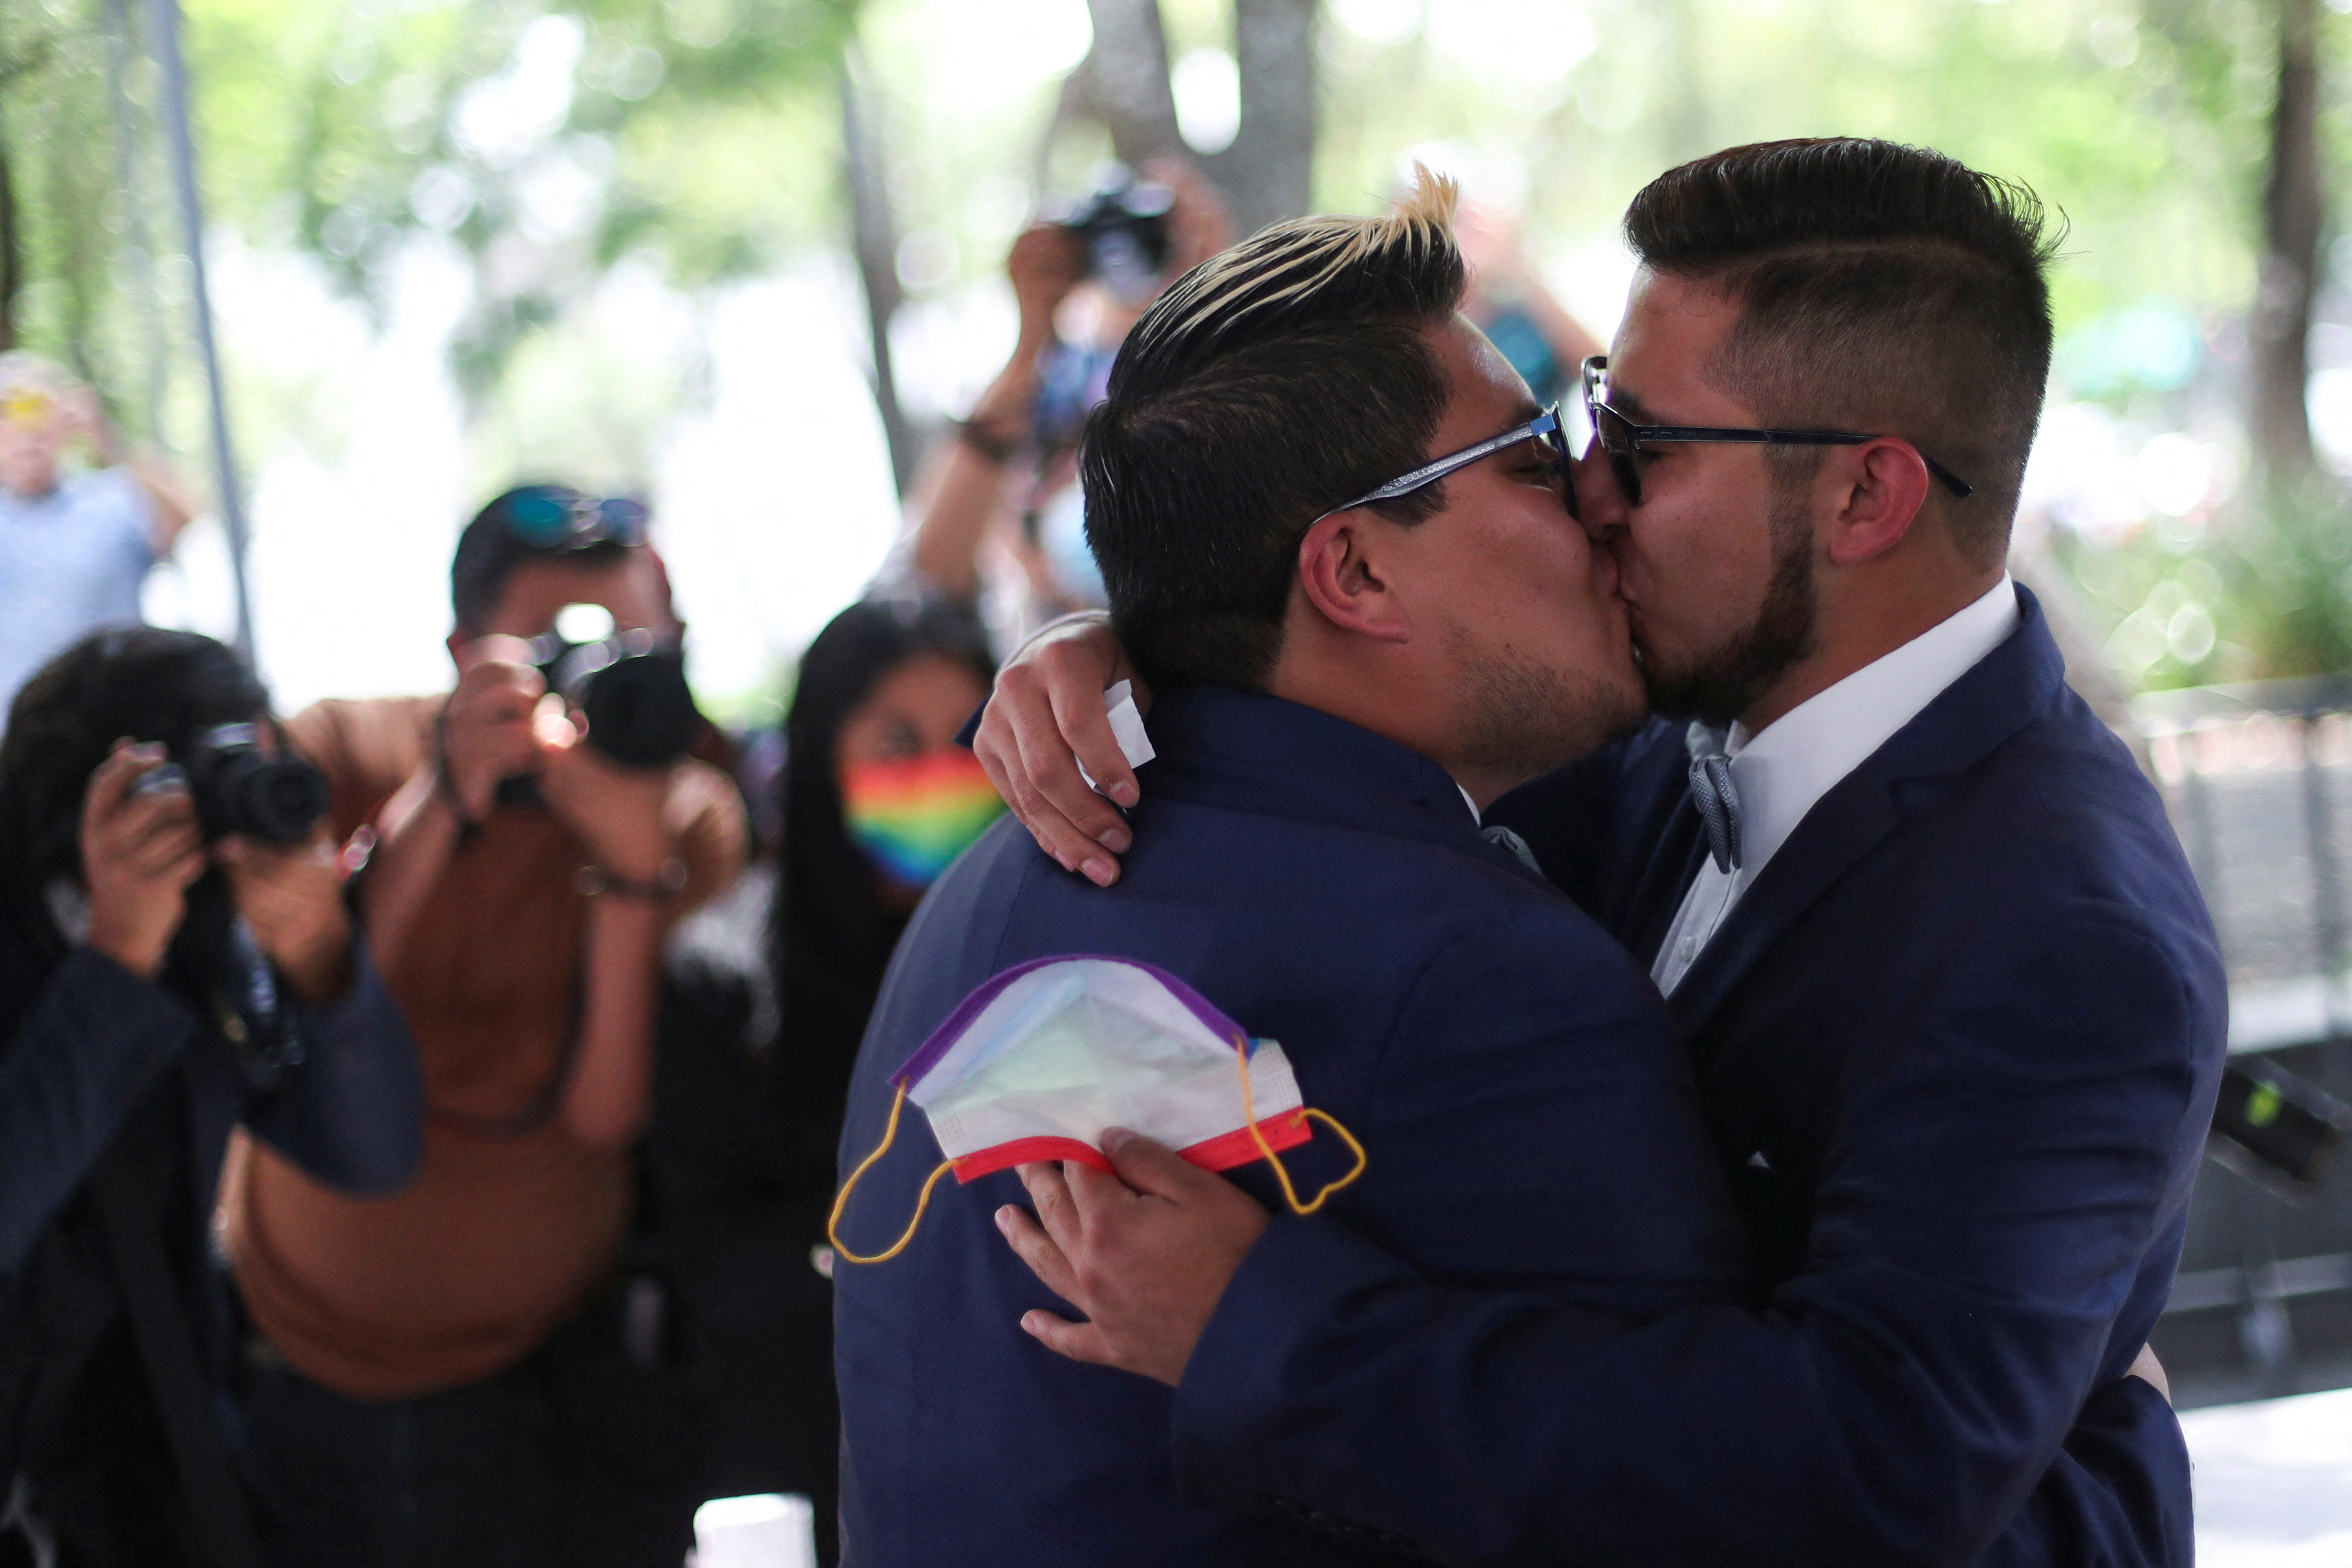 Mexicans celebrate LGBTQ+ pride month with massive wedding